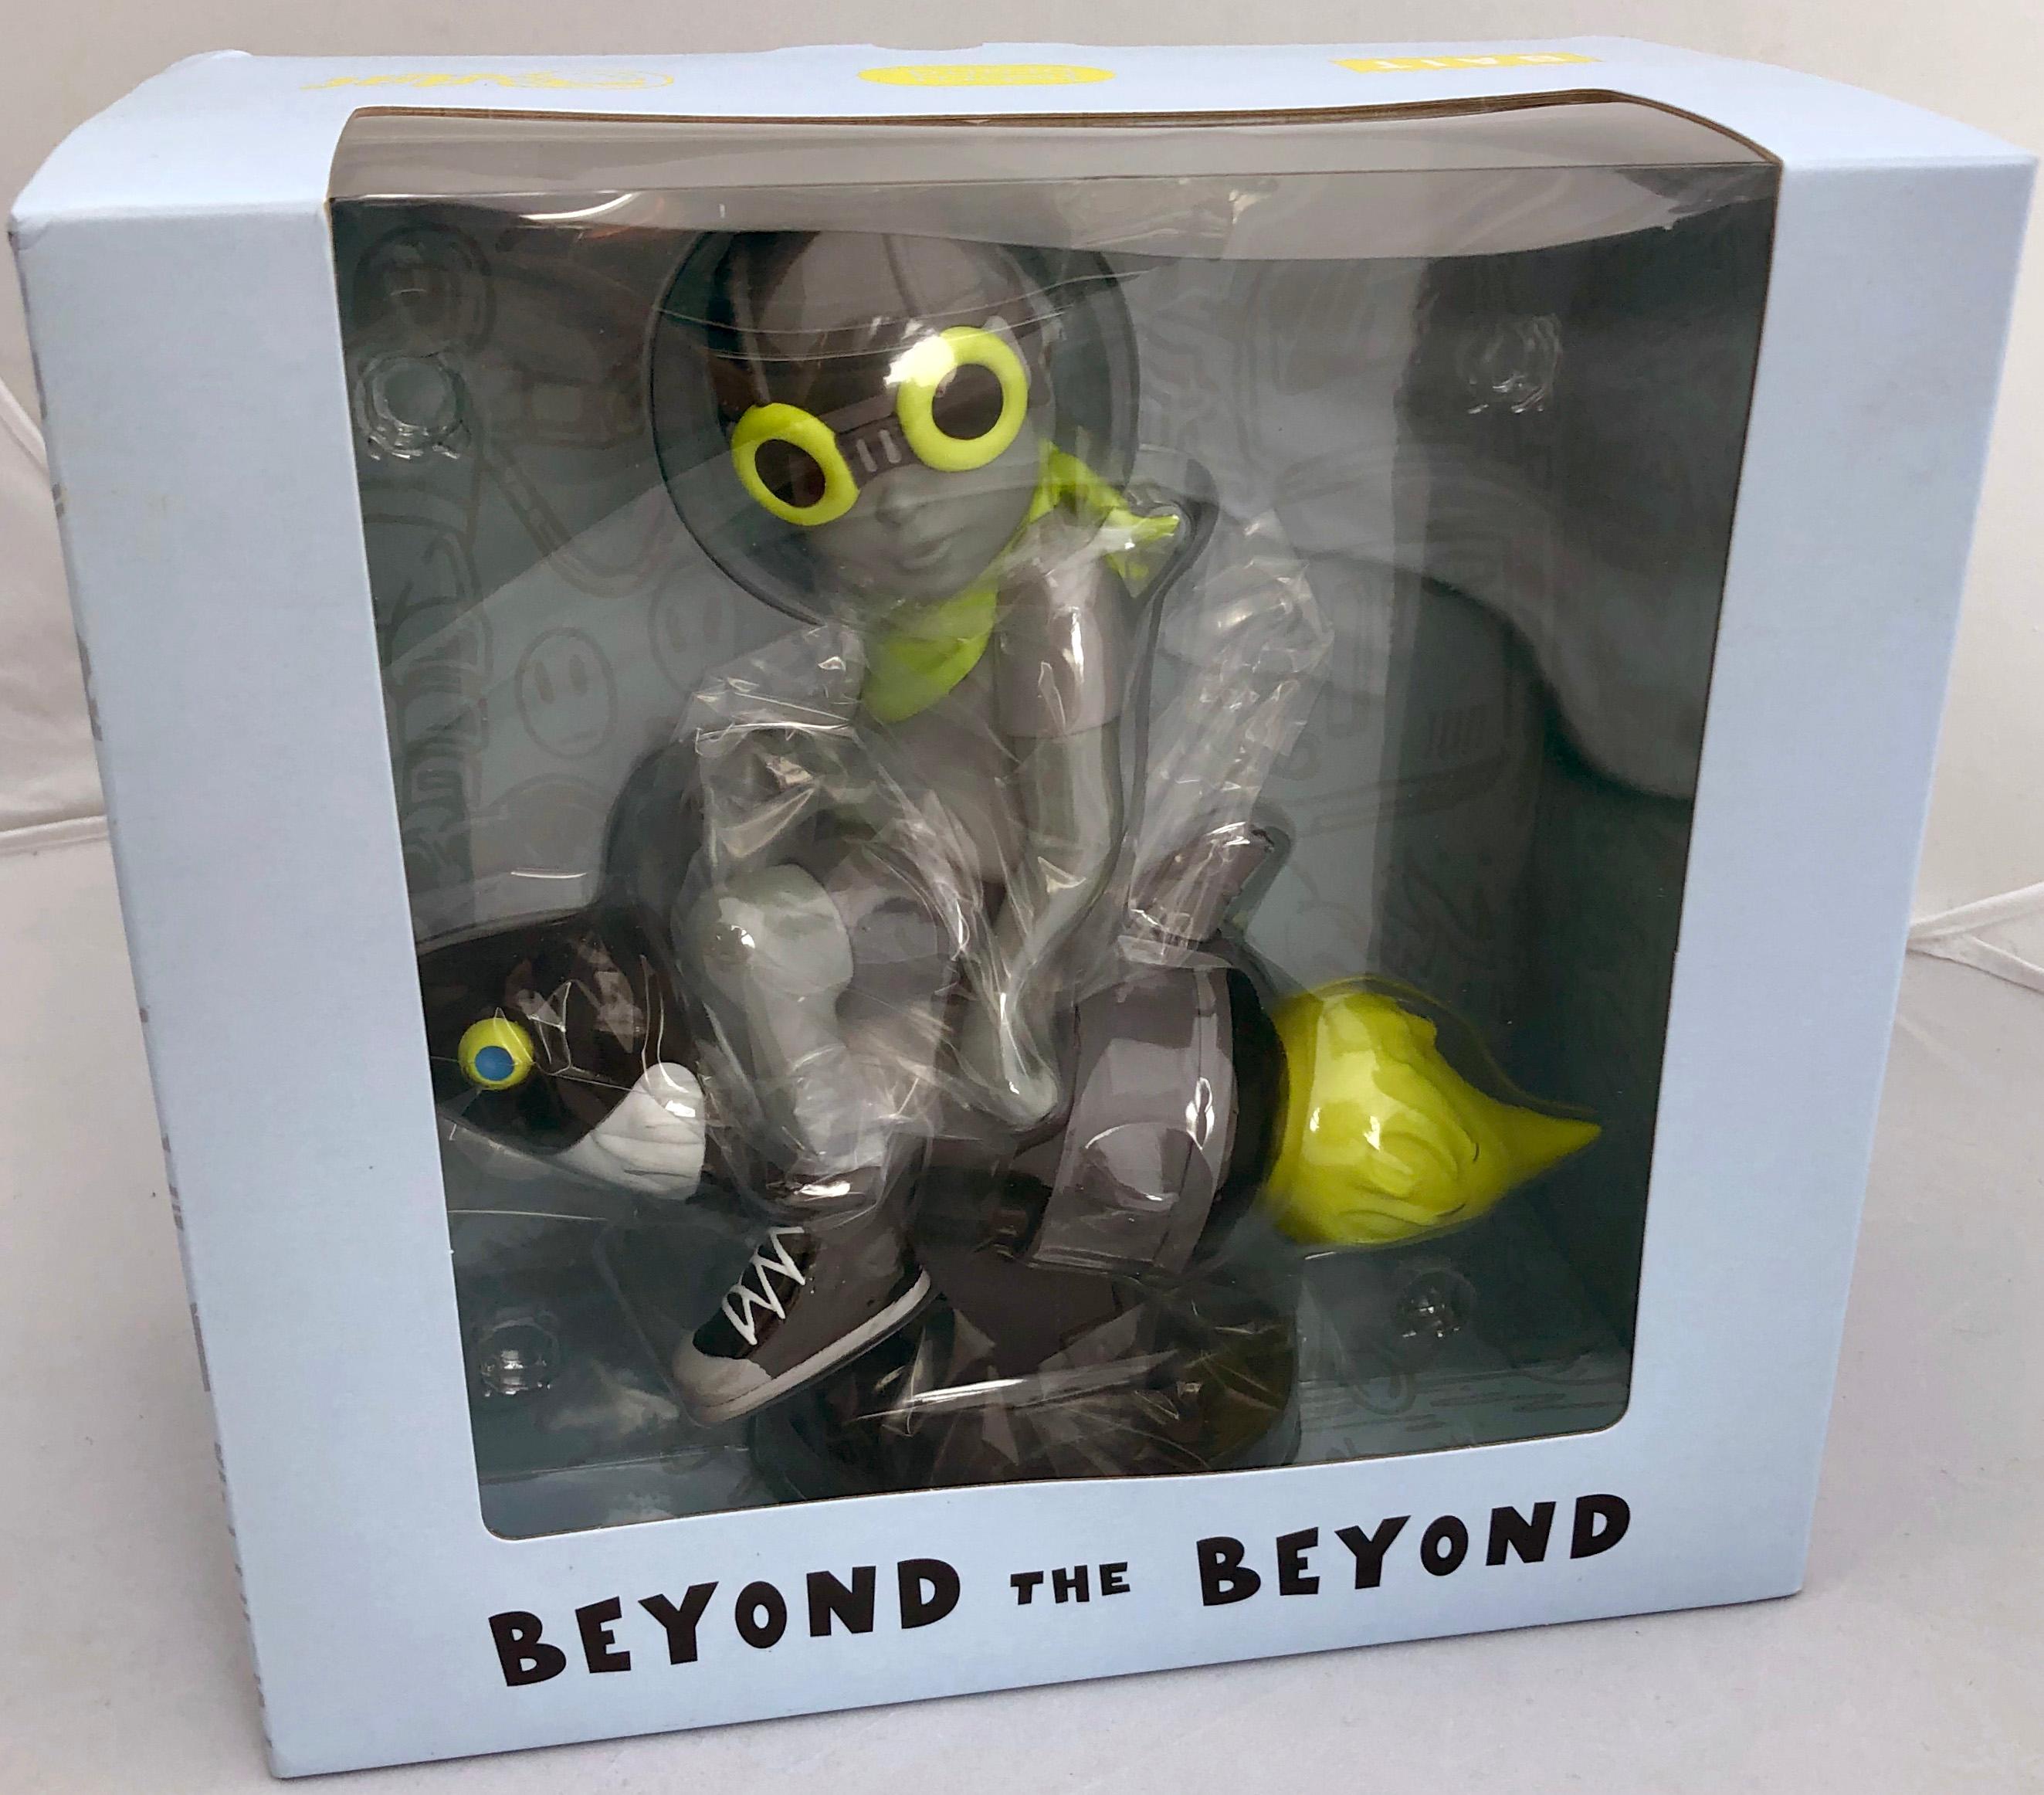 Hebru Brantley Beyond the Beyond (Grey Volt), 2018. New in its original packaging.

Medium: Painted cast vinyl. 
Dimensions: 9 x 8 x 4 inches (22.9 x 20.3 x 10.2 cm). 
New and sealed in its original packaging.
From a sold out un-numbered edition;